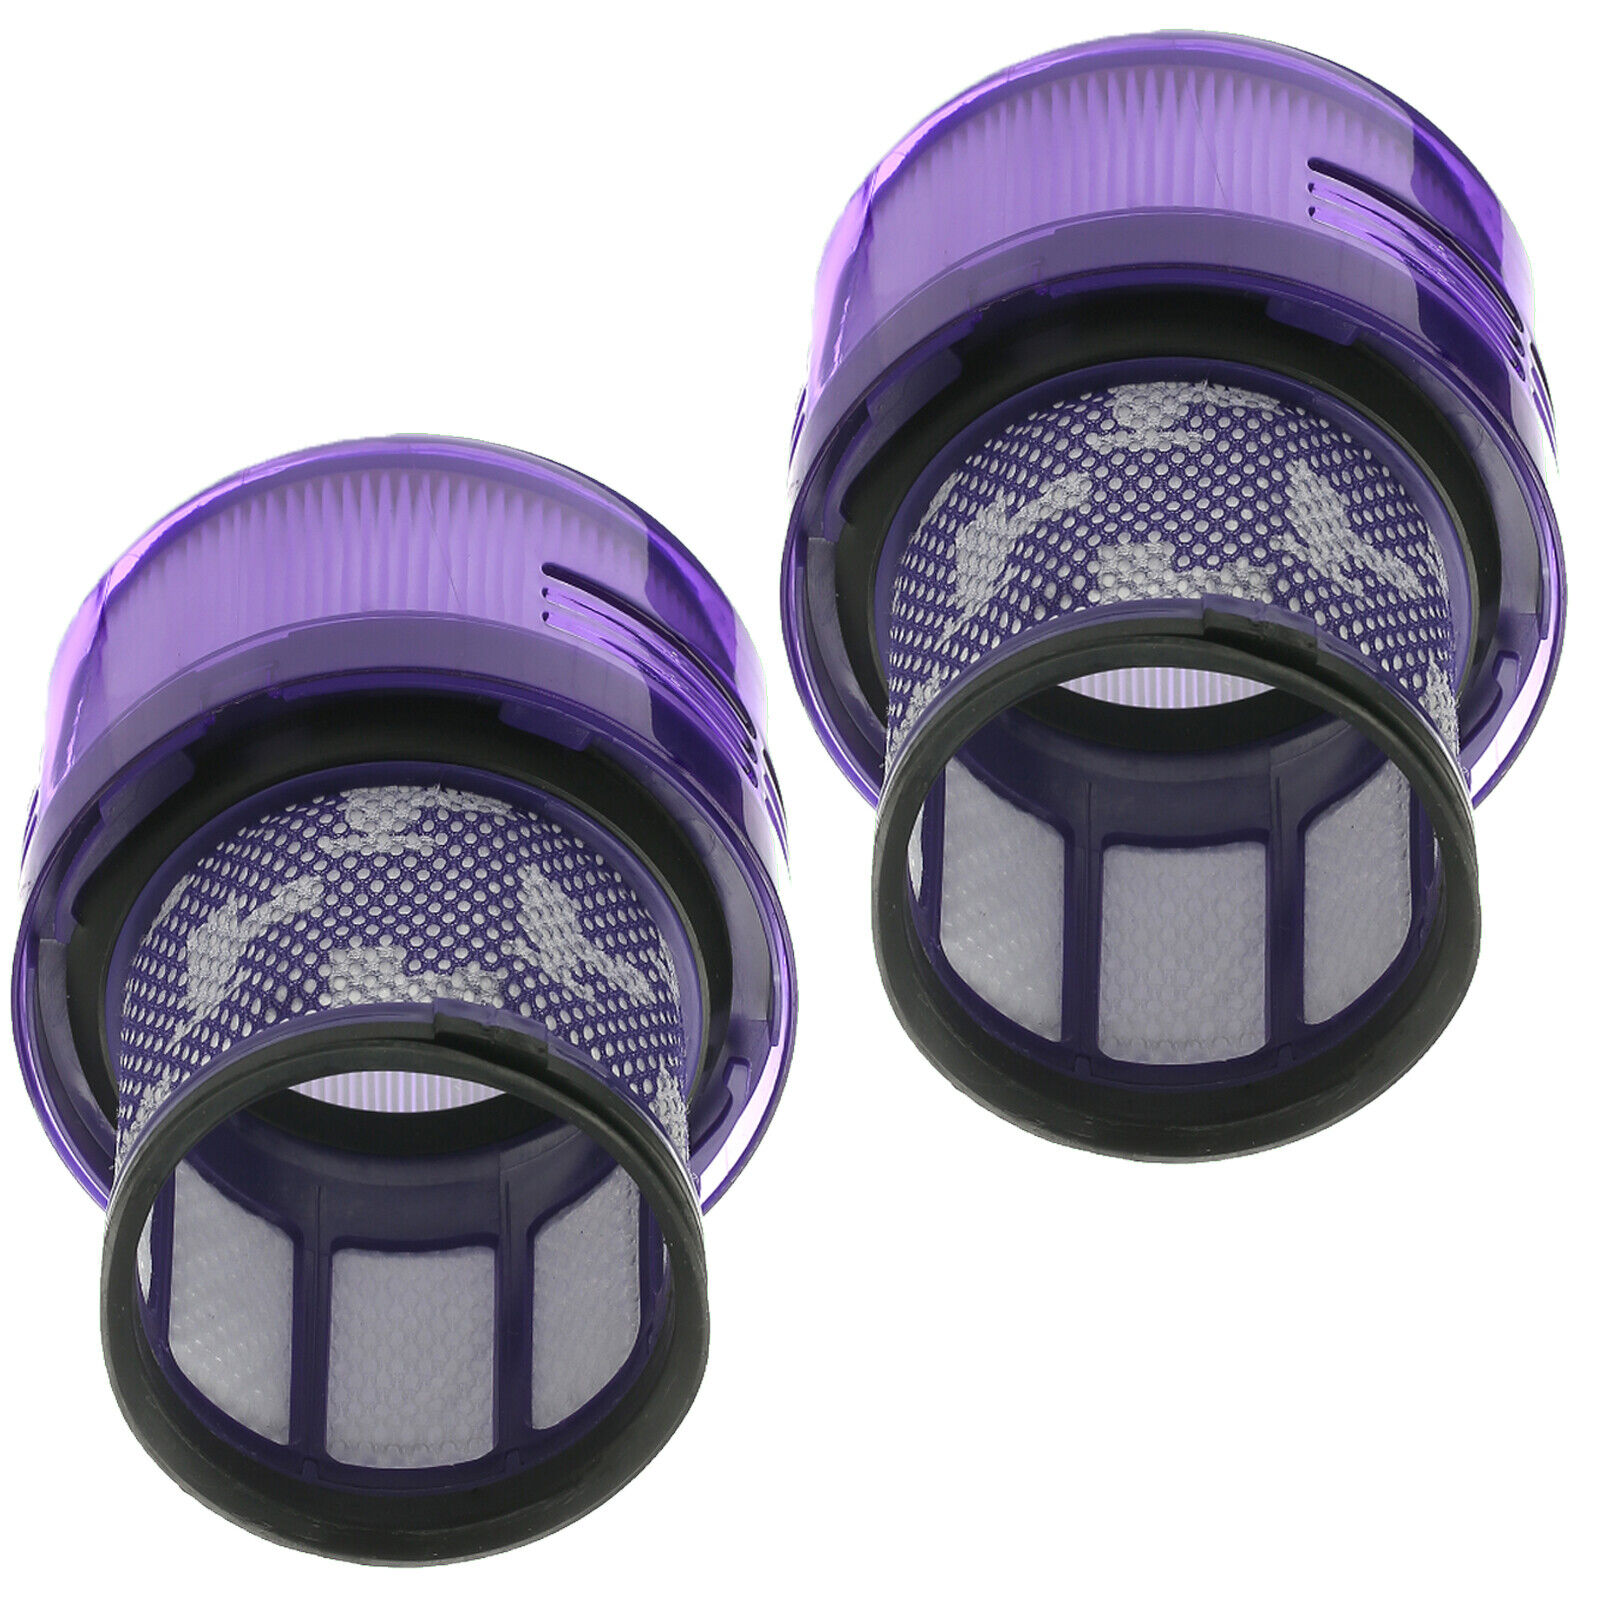 2 x Washable Filters For Dyson V11 Absolute Animal Cordless Vacuum SV14 SV15